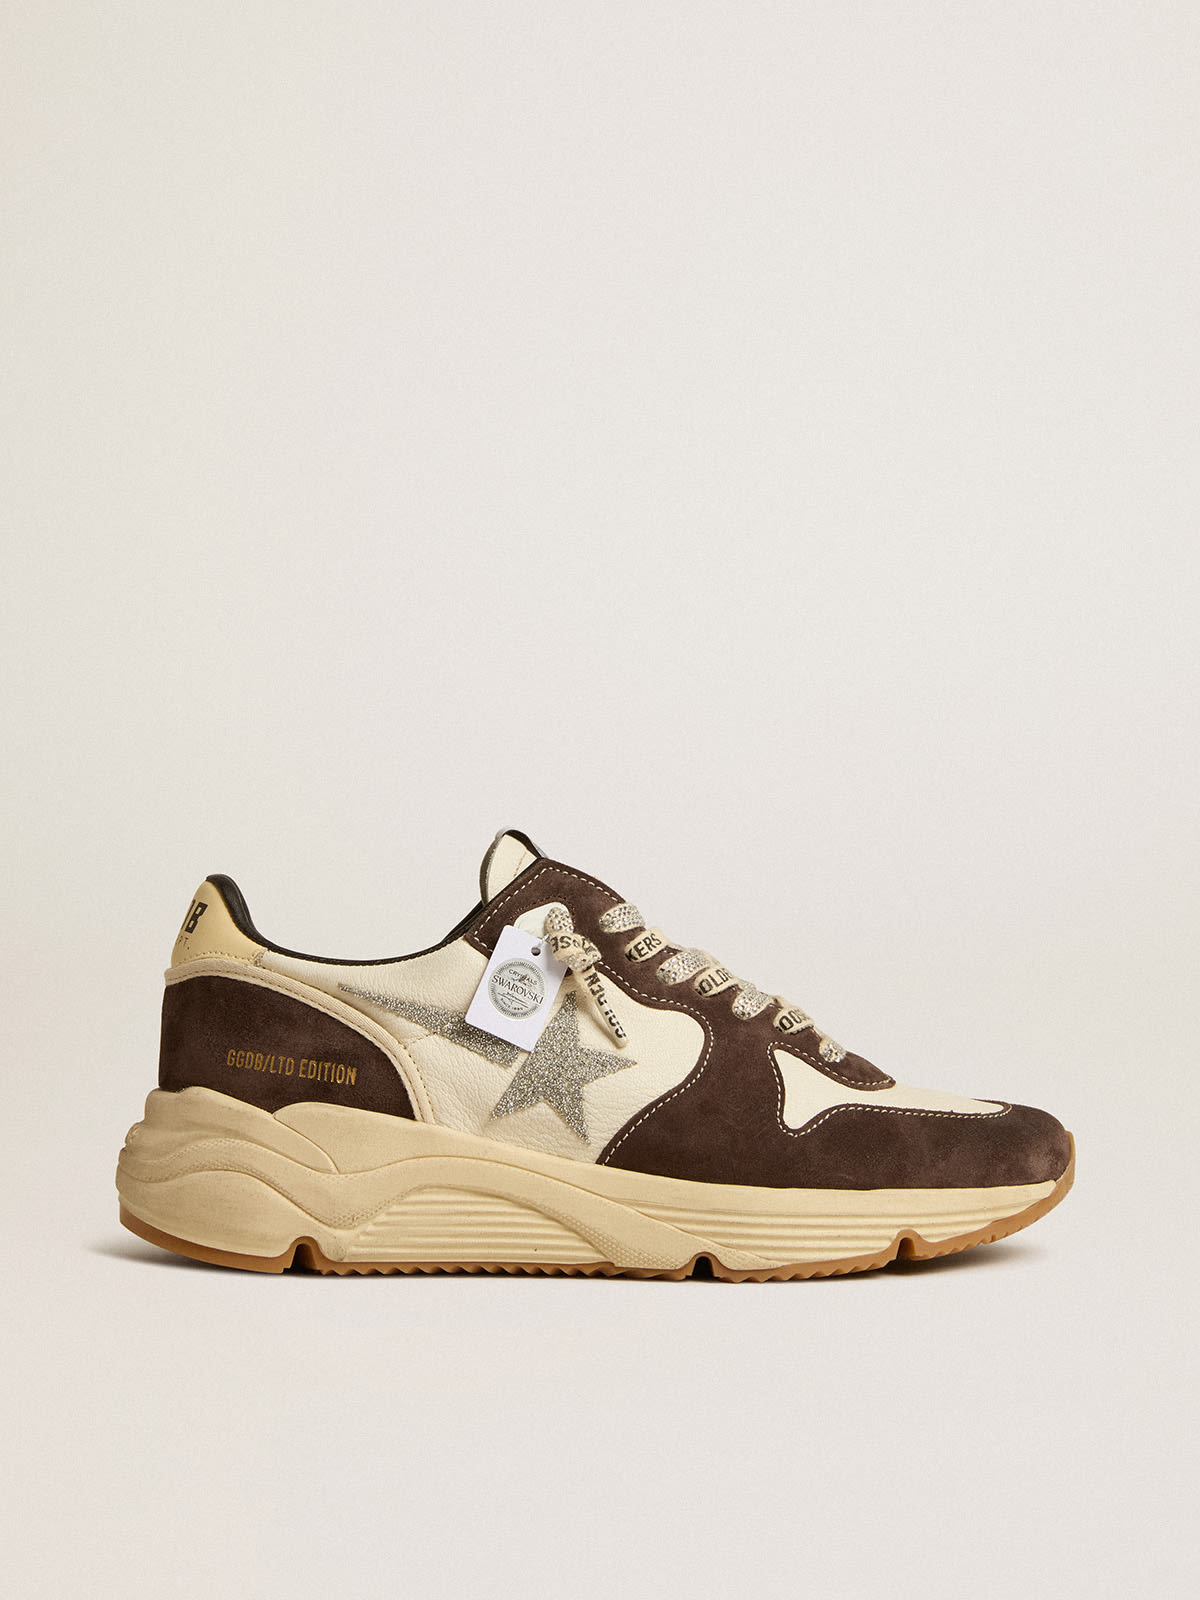 Golden Goose - Running Sole LTD in nappa and brown suede with a Swarovski star in 